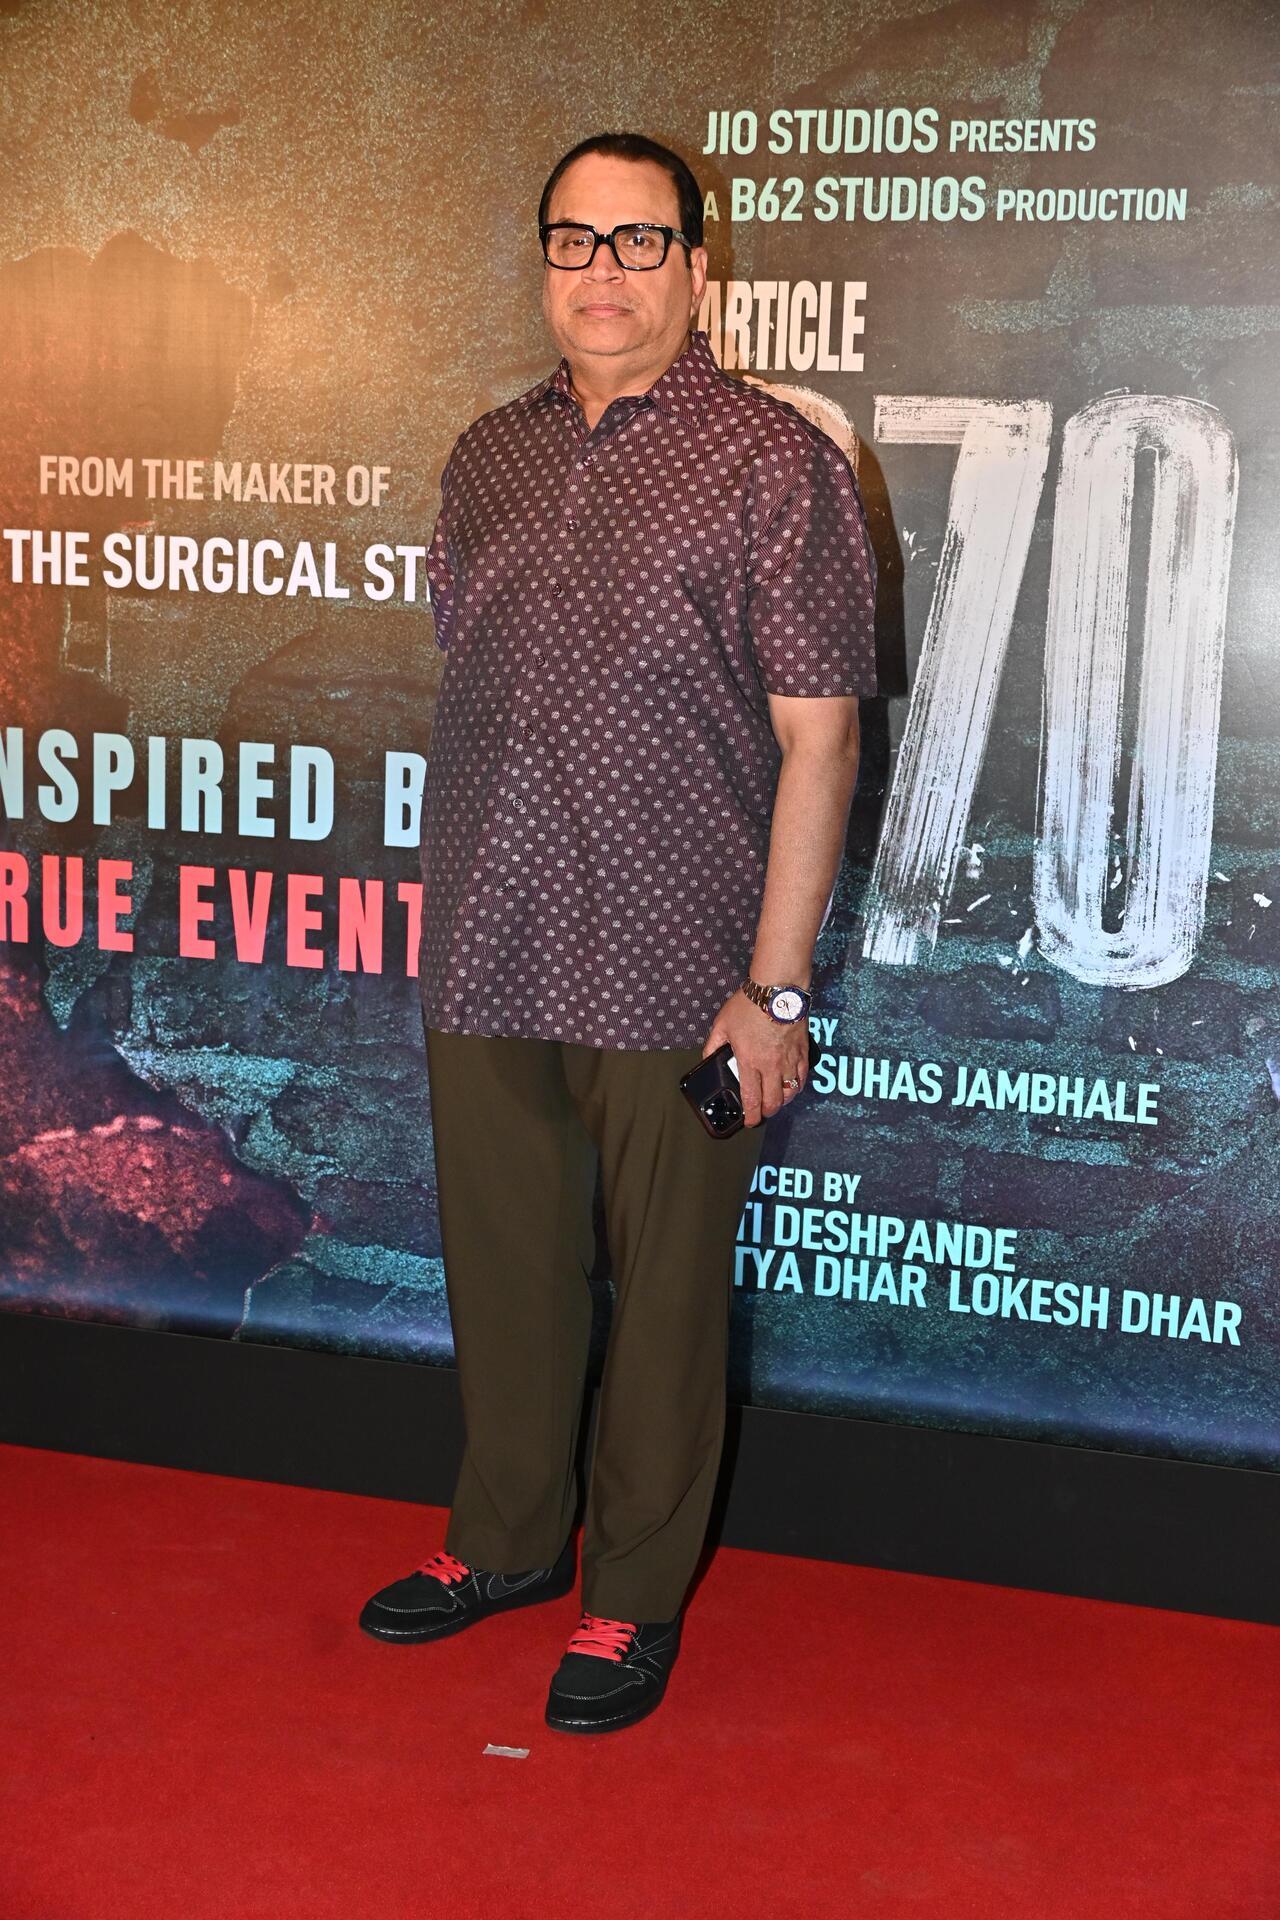 Film producer Ramesh Taurani was also spotted at the premiere